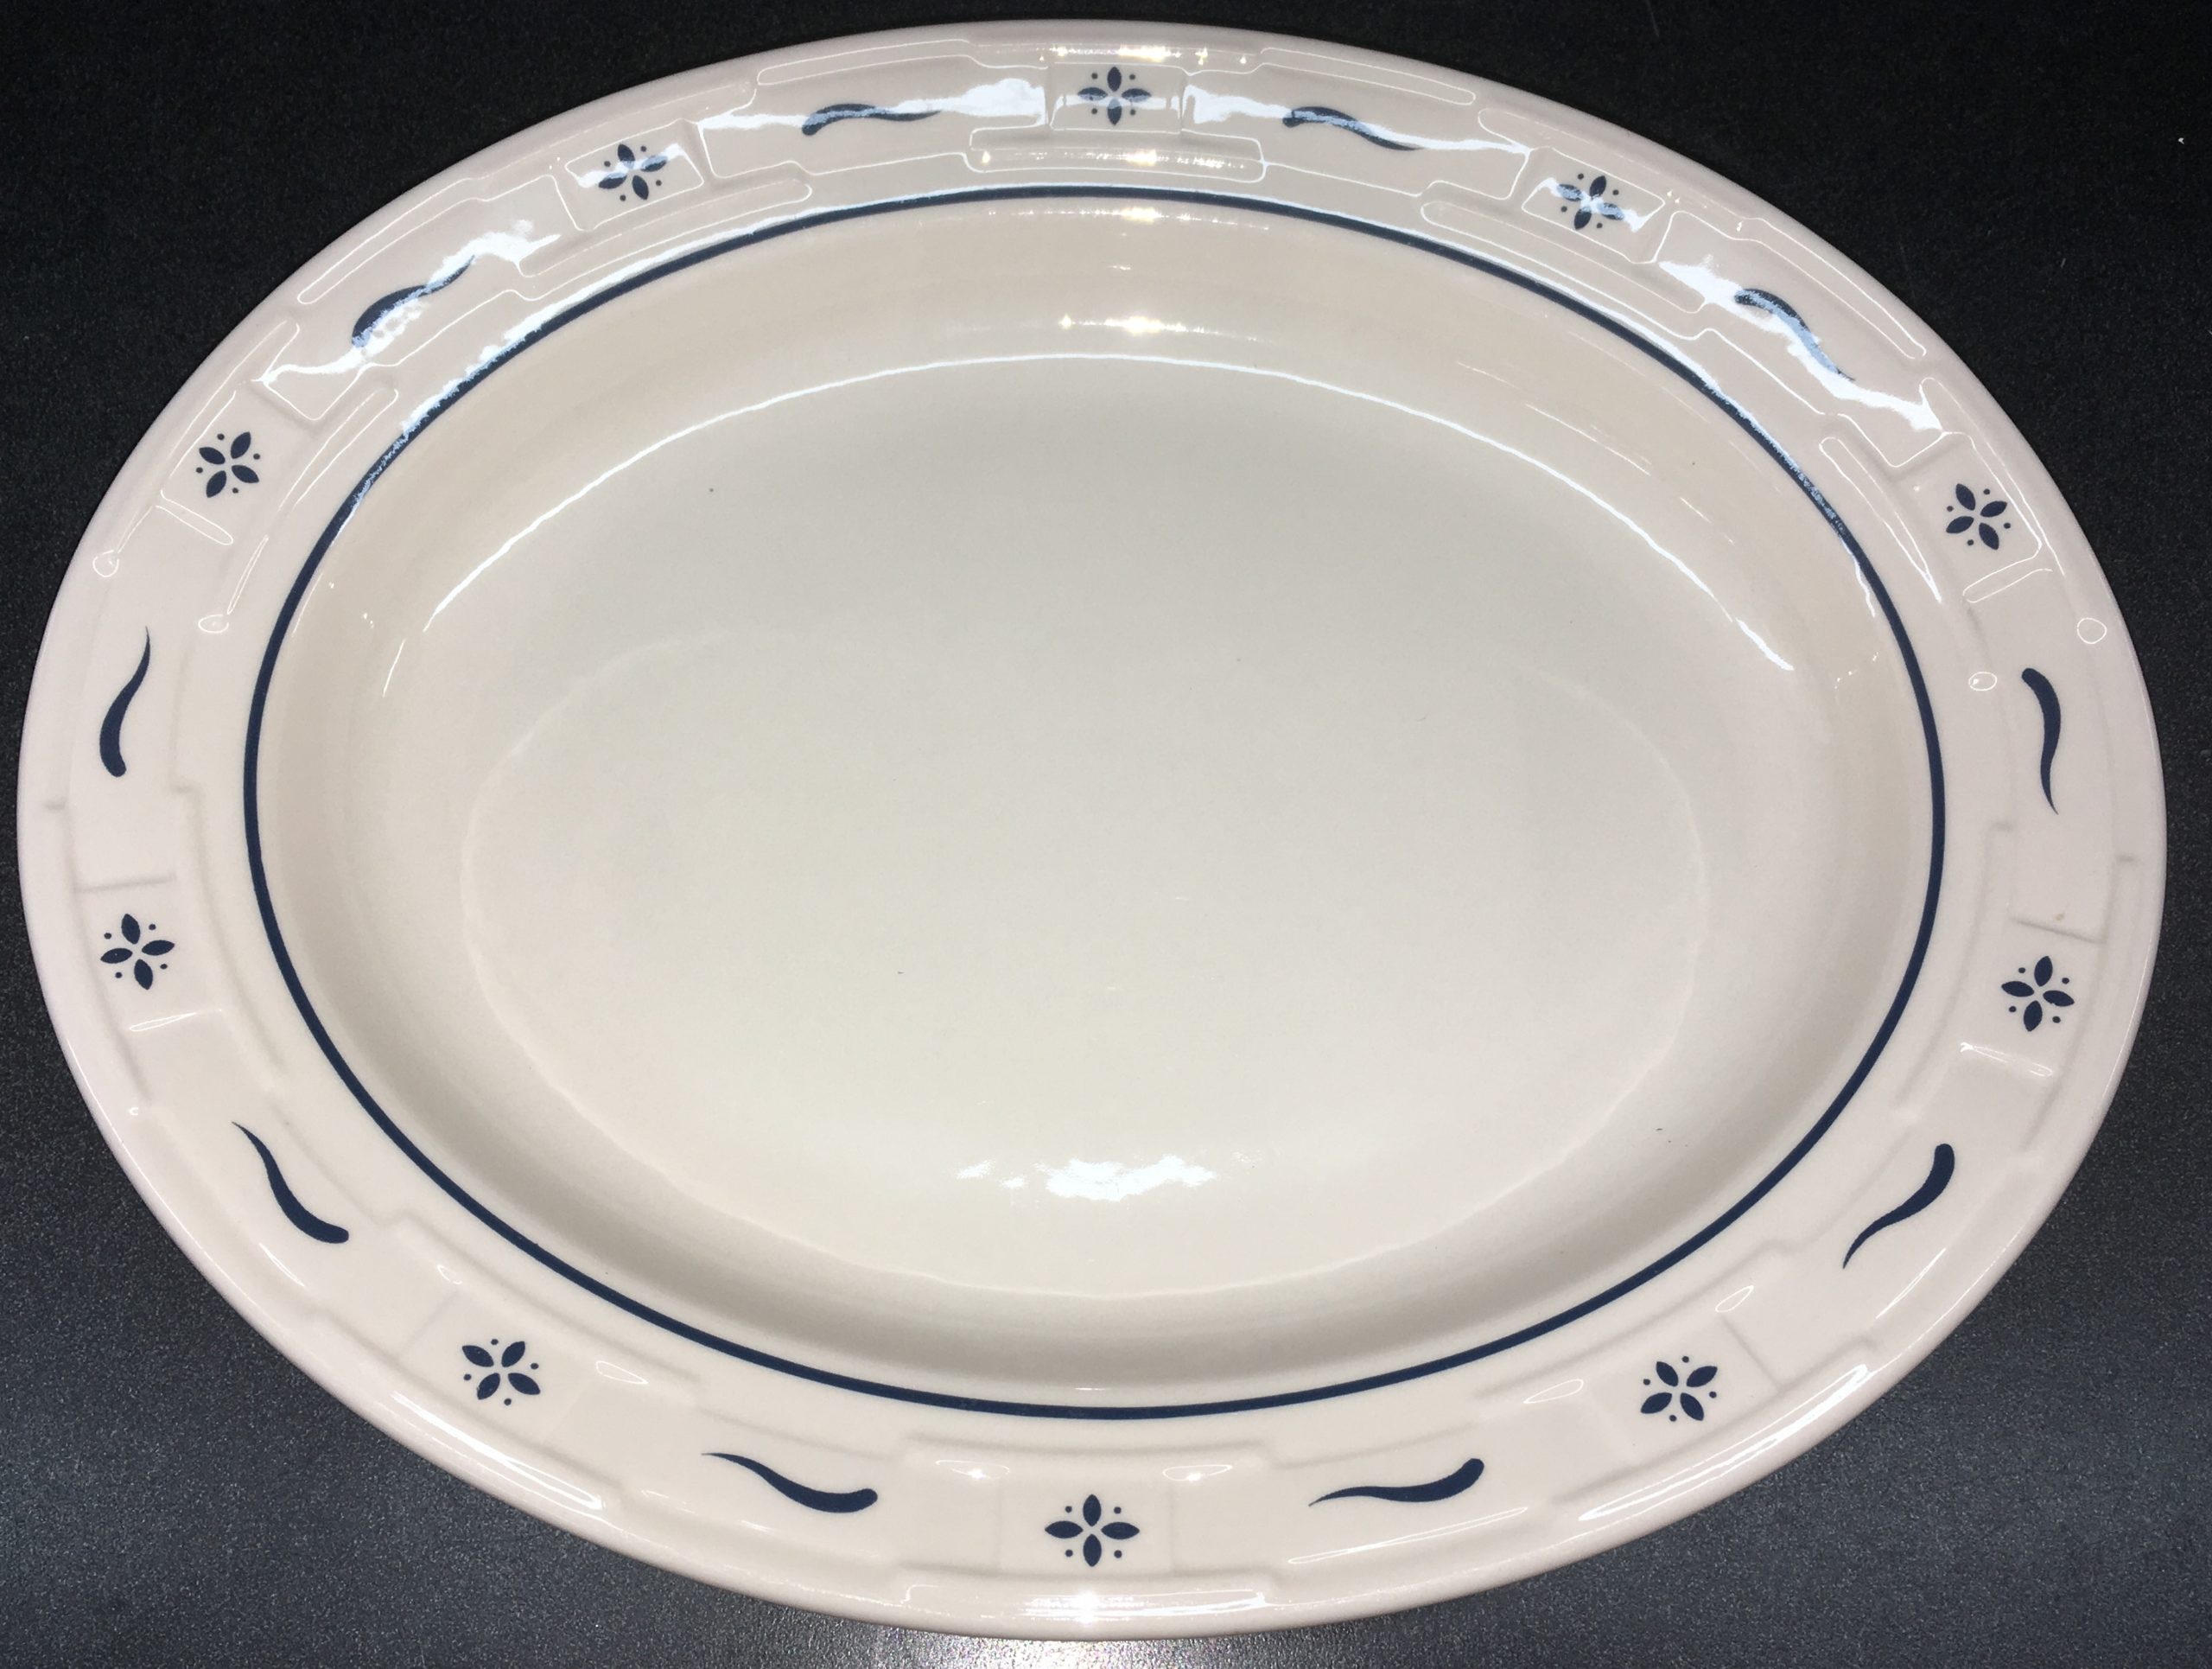 Longaberger Pottery Soft Square Dinner Plate 11" Classic blue NEW in box